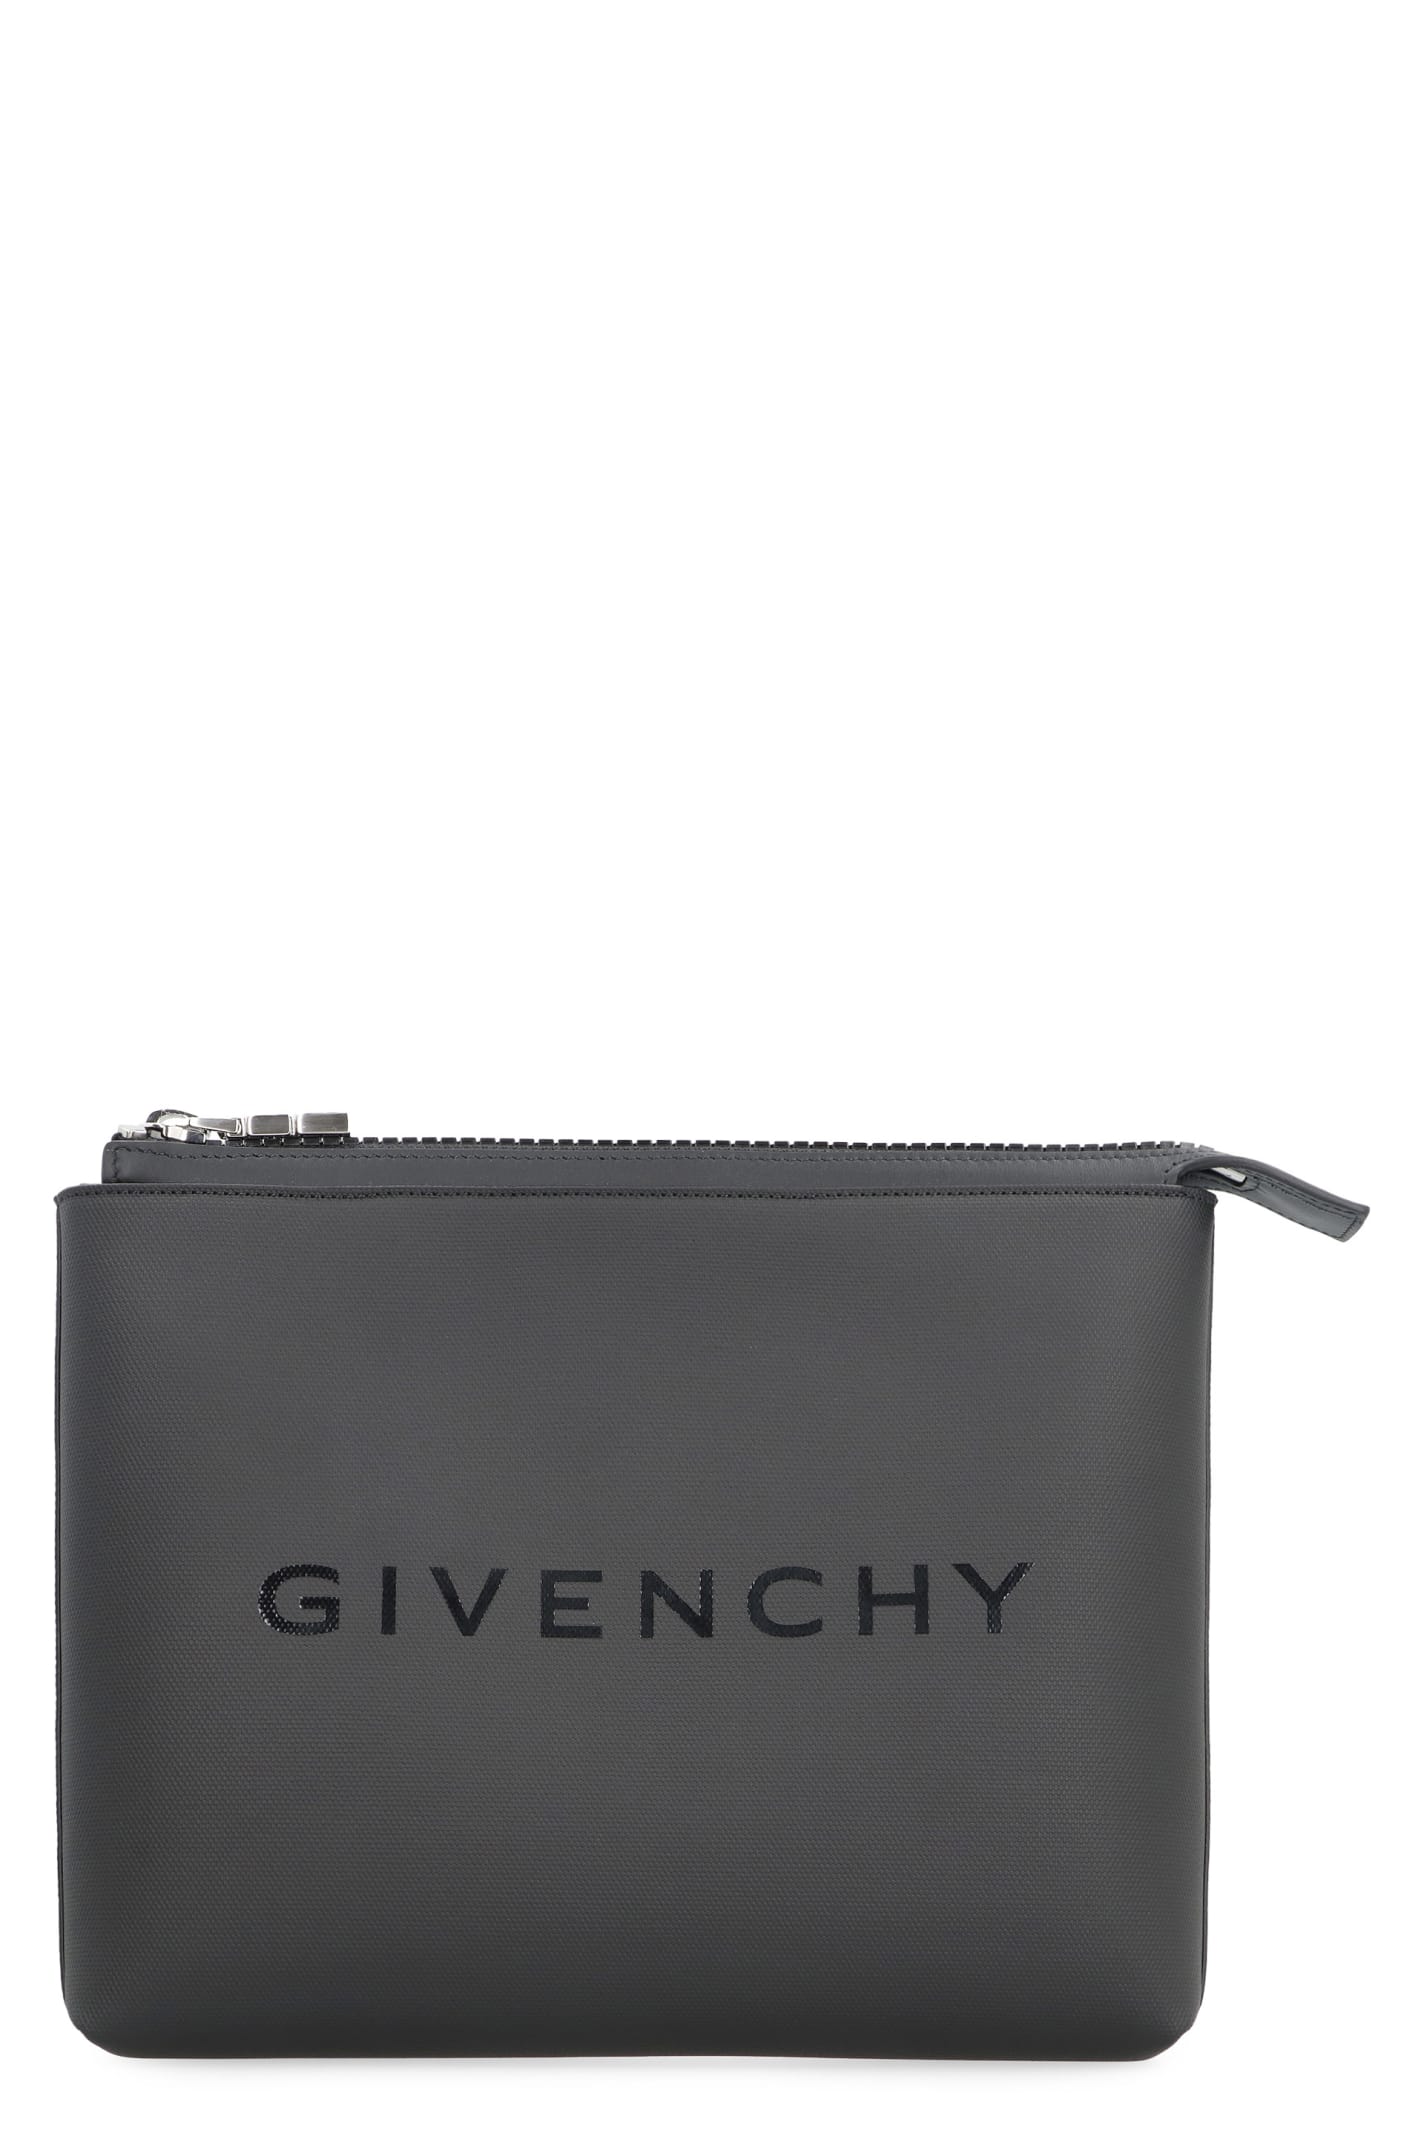 Givenchy Coated Canvas Flat Pouch